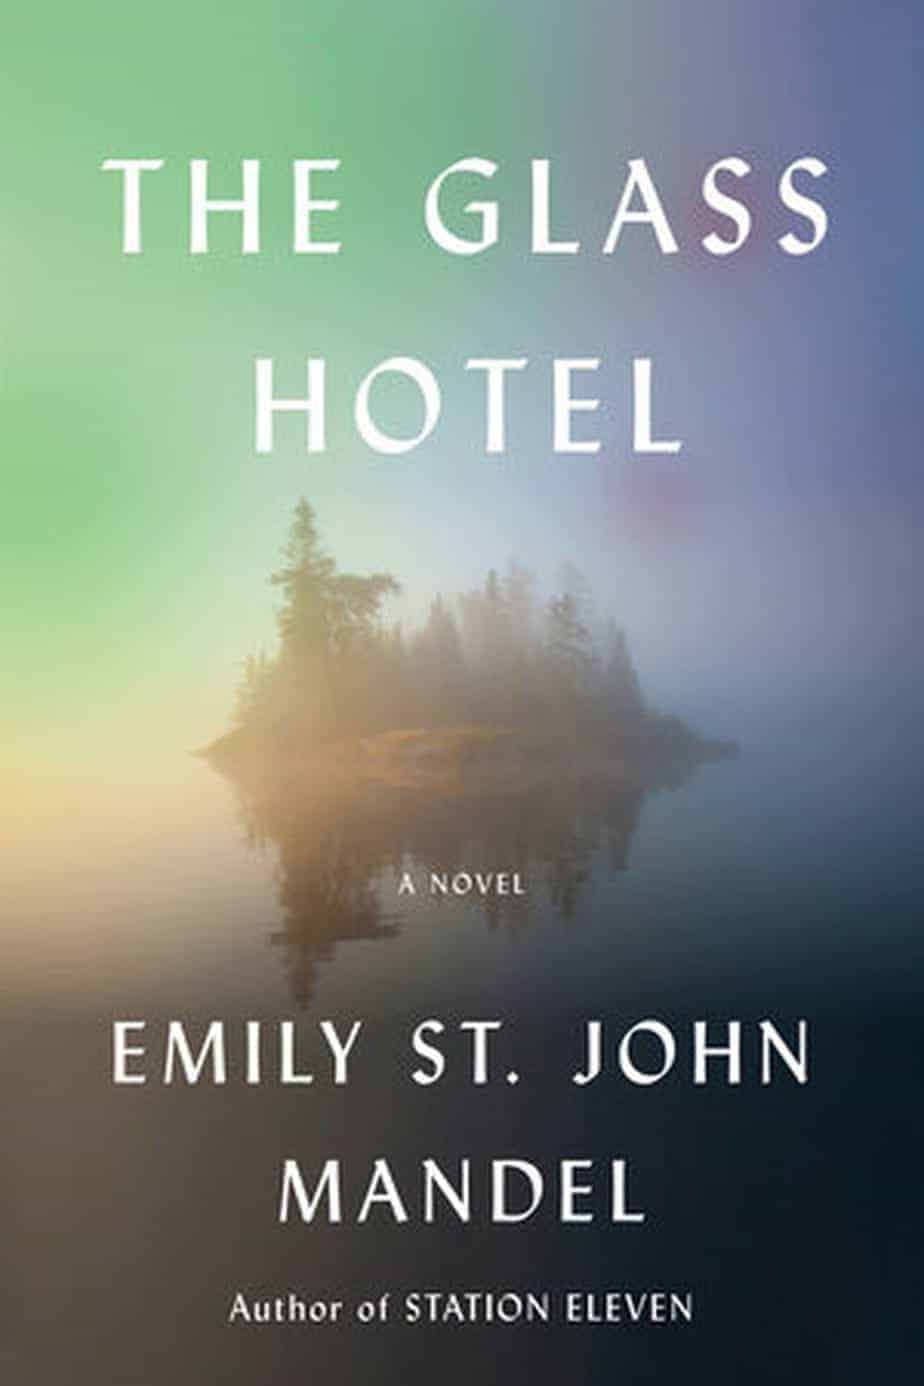 Cover of The Glass Hotel A Novel by Emily St John Mandel author of Station Eleven